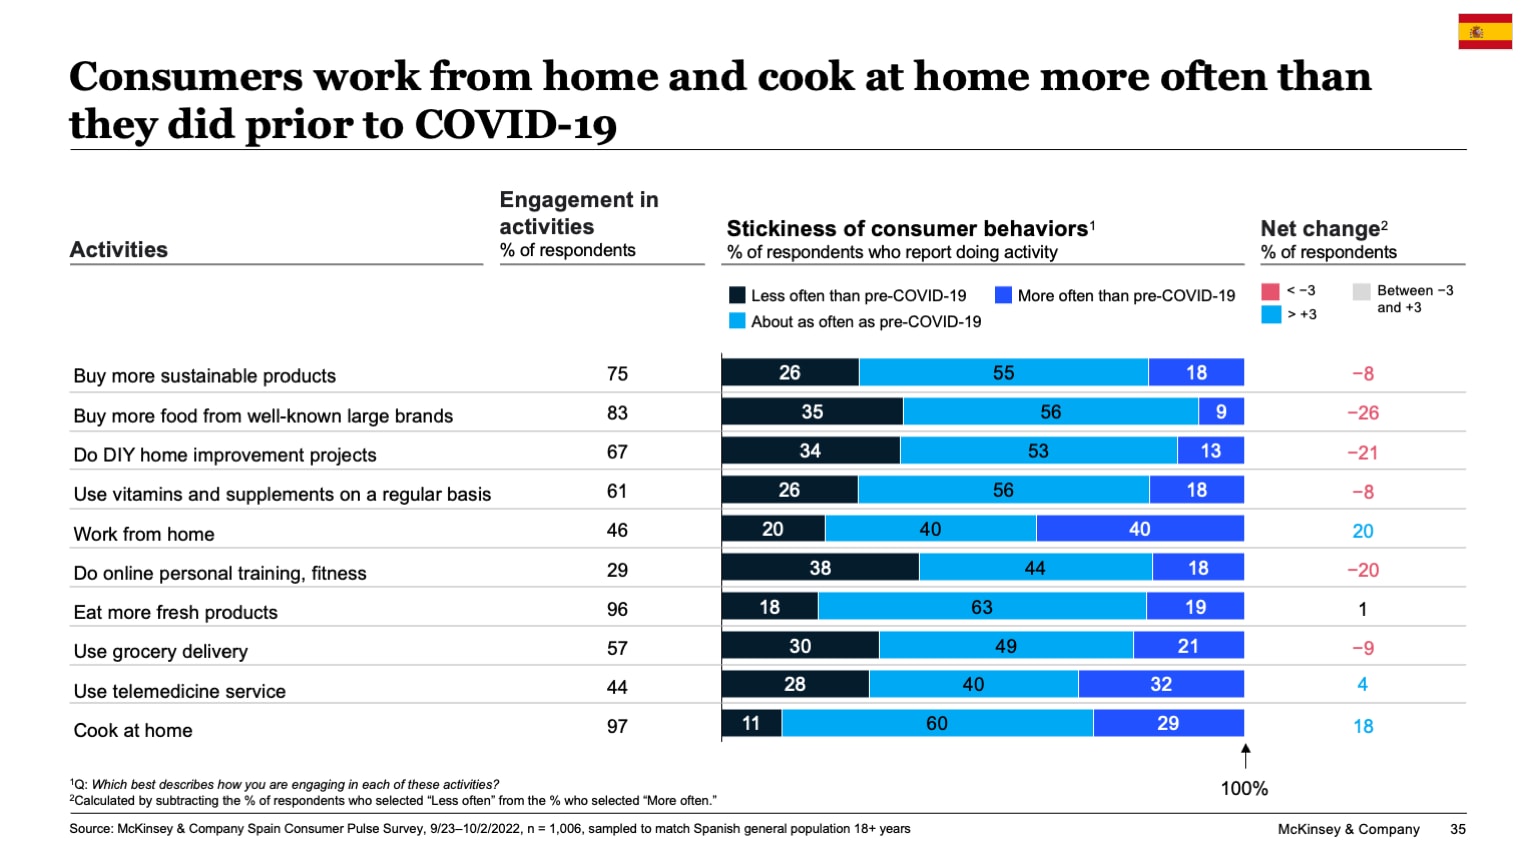 Consumers work from home and cook at home more often than they did prior to COVID-19